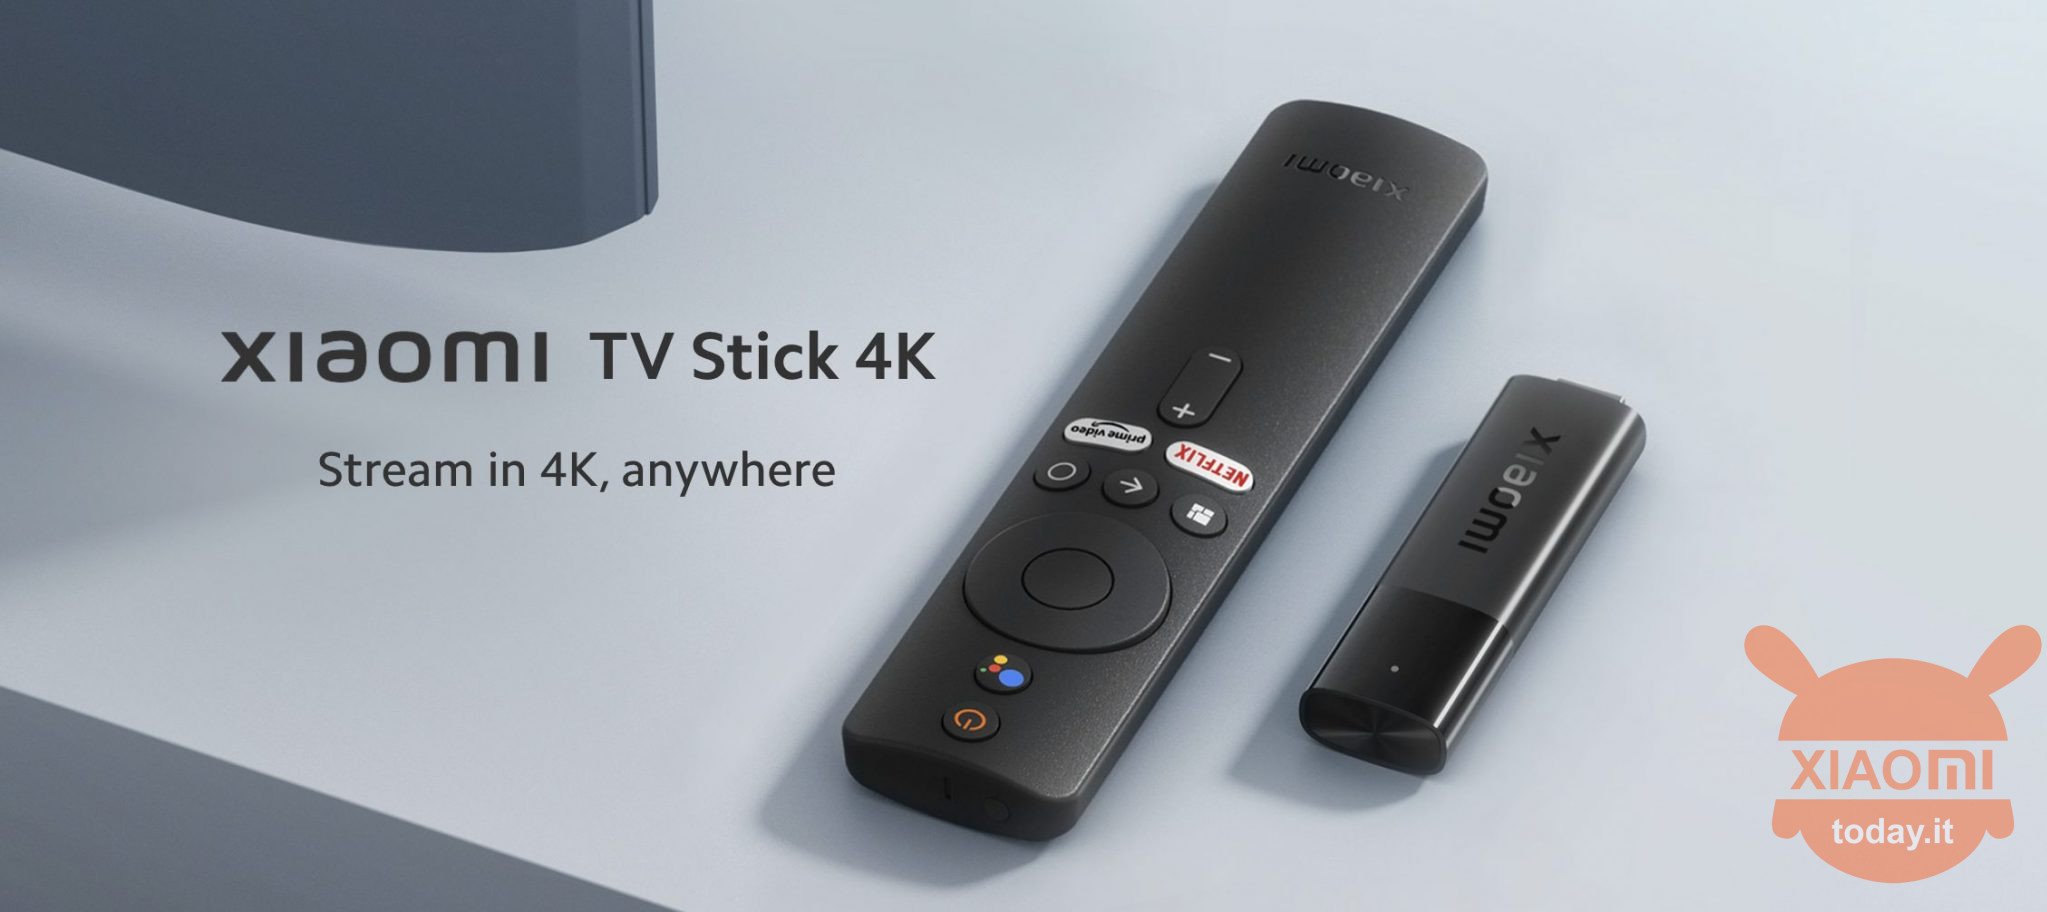 xiaomi mi tv stick 4k official: specifications, prices release